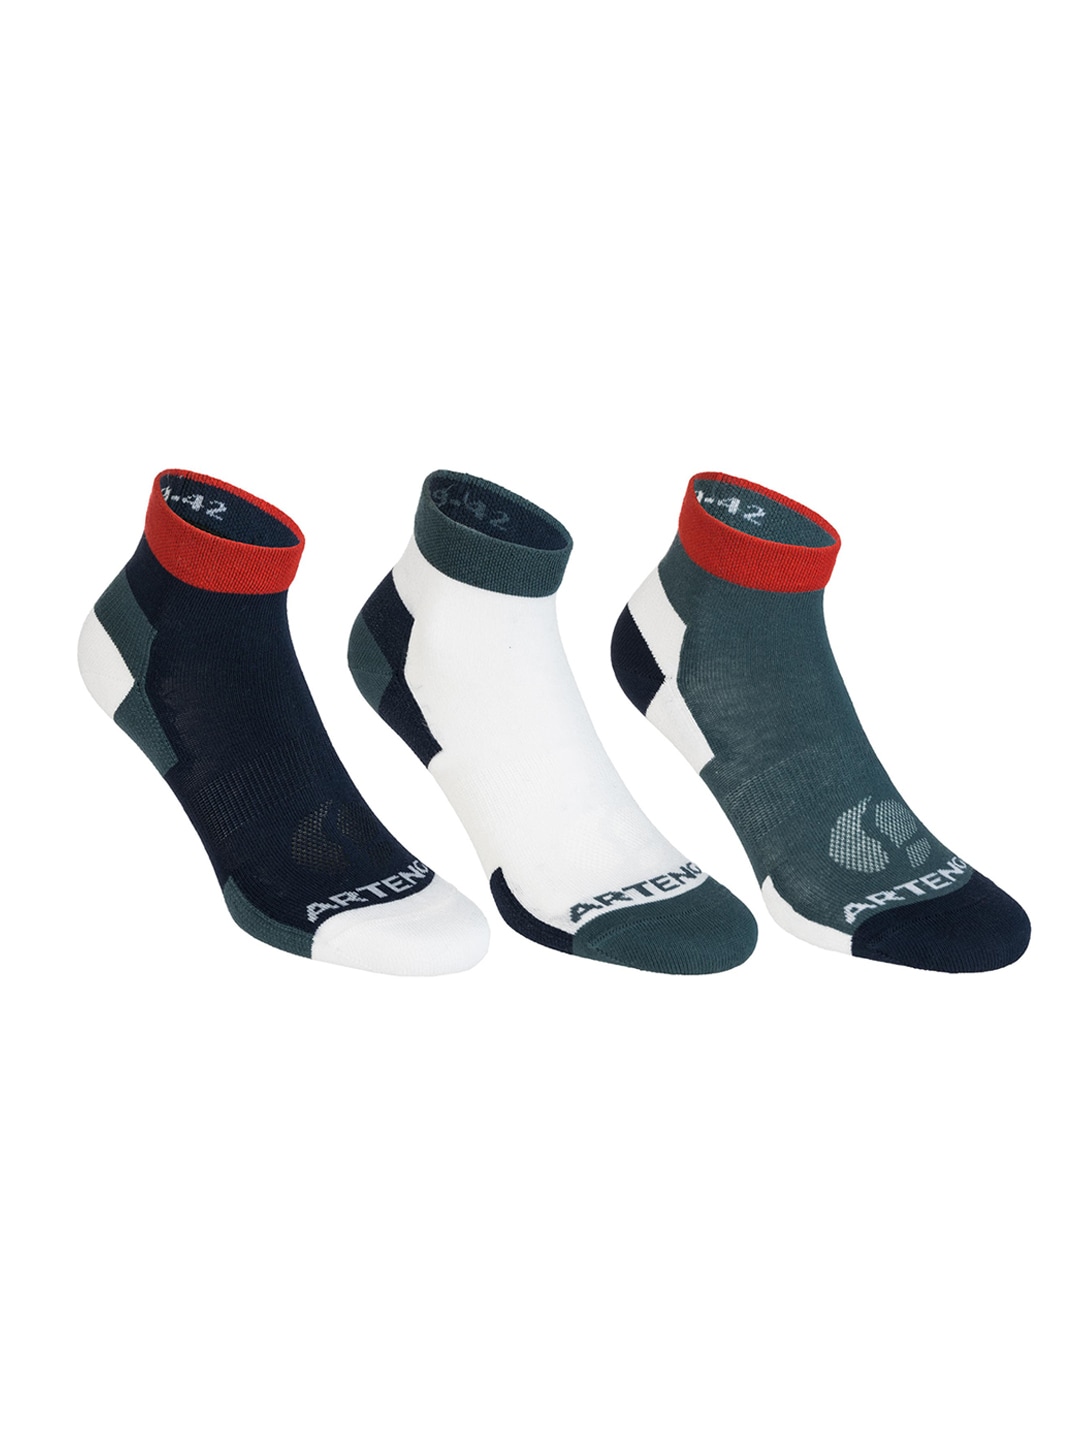 Artengo By Decathlon Pack of 3 Assorted Ankle-Length Socks Price in India